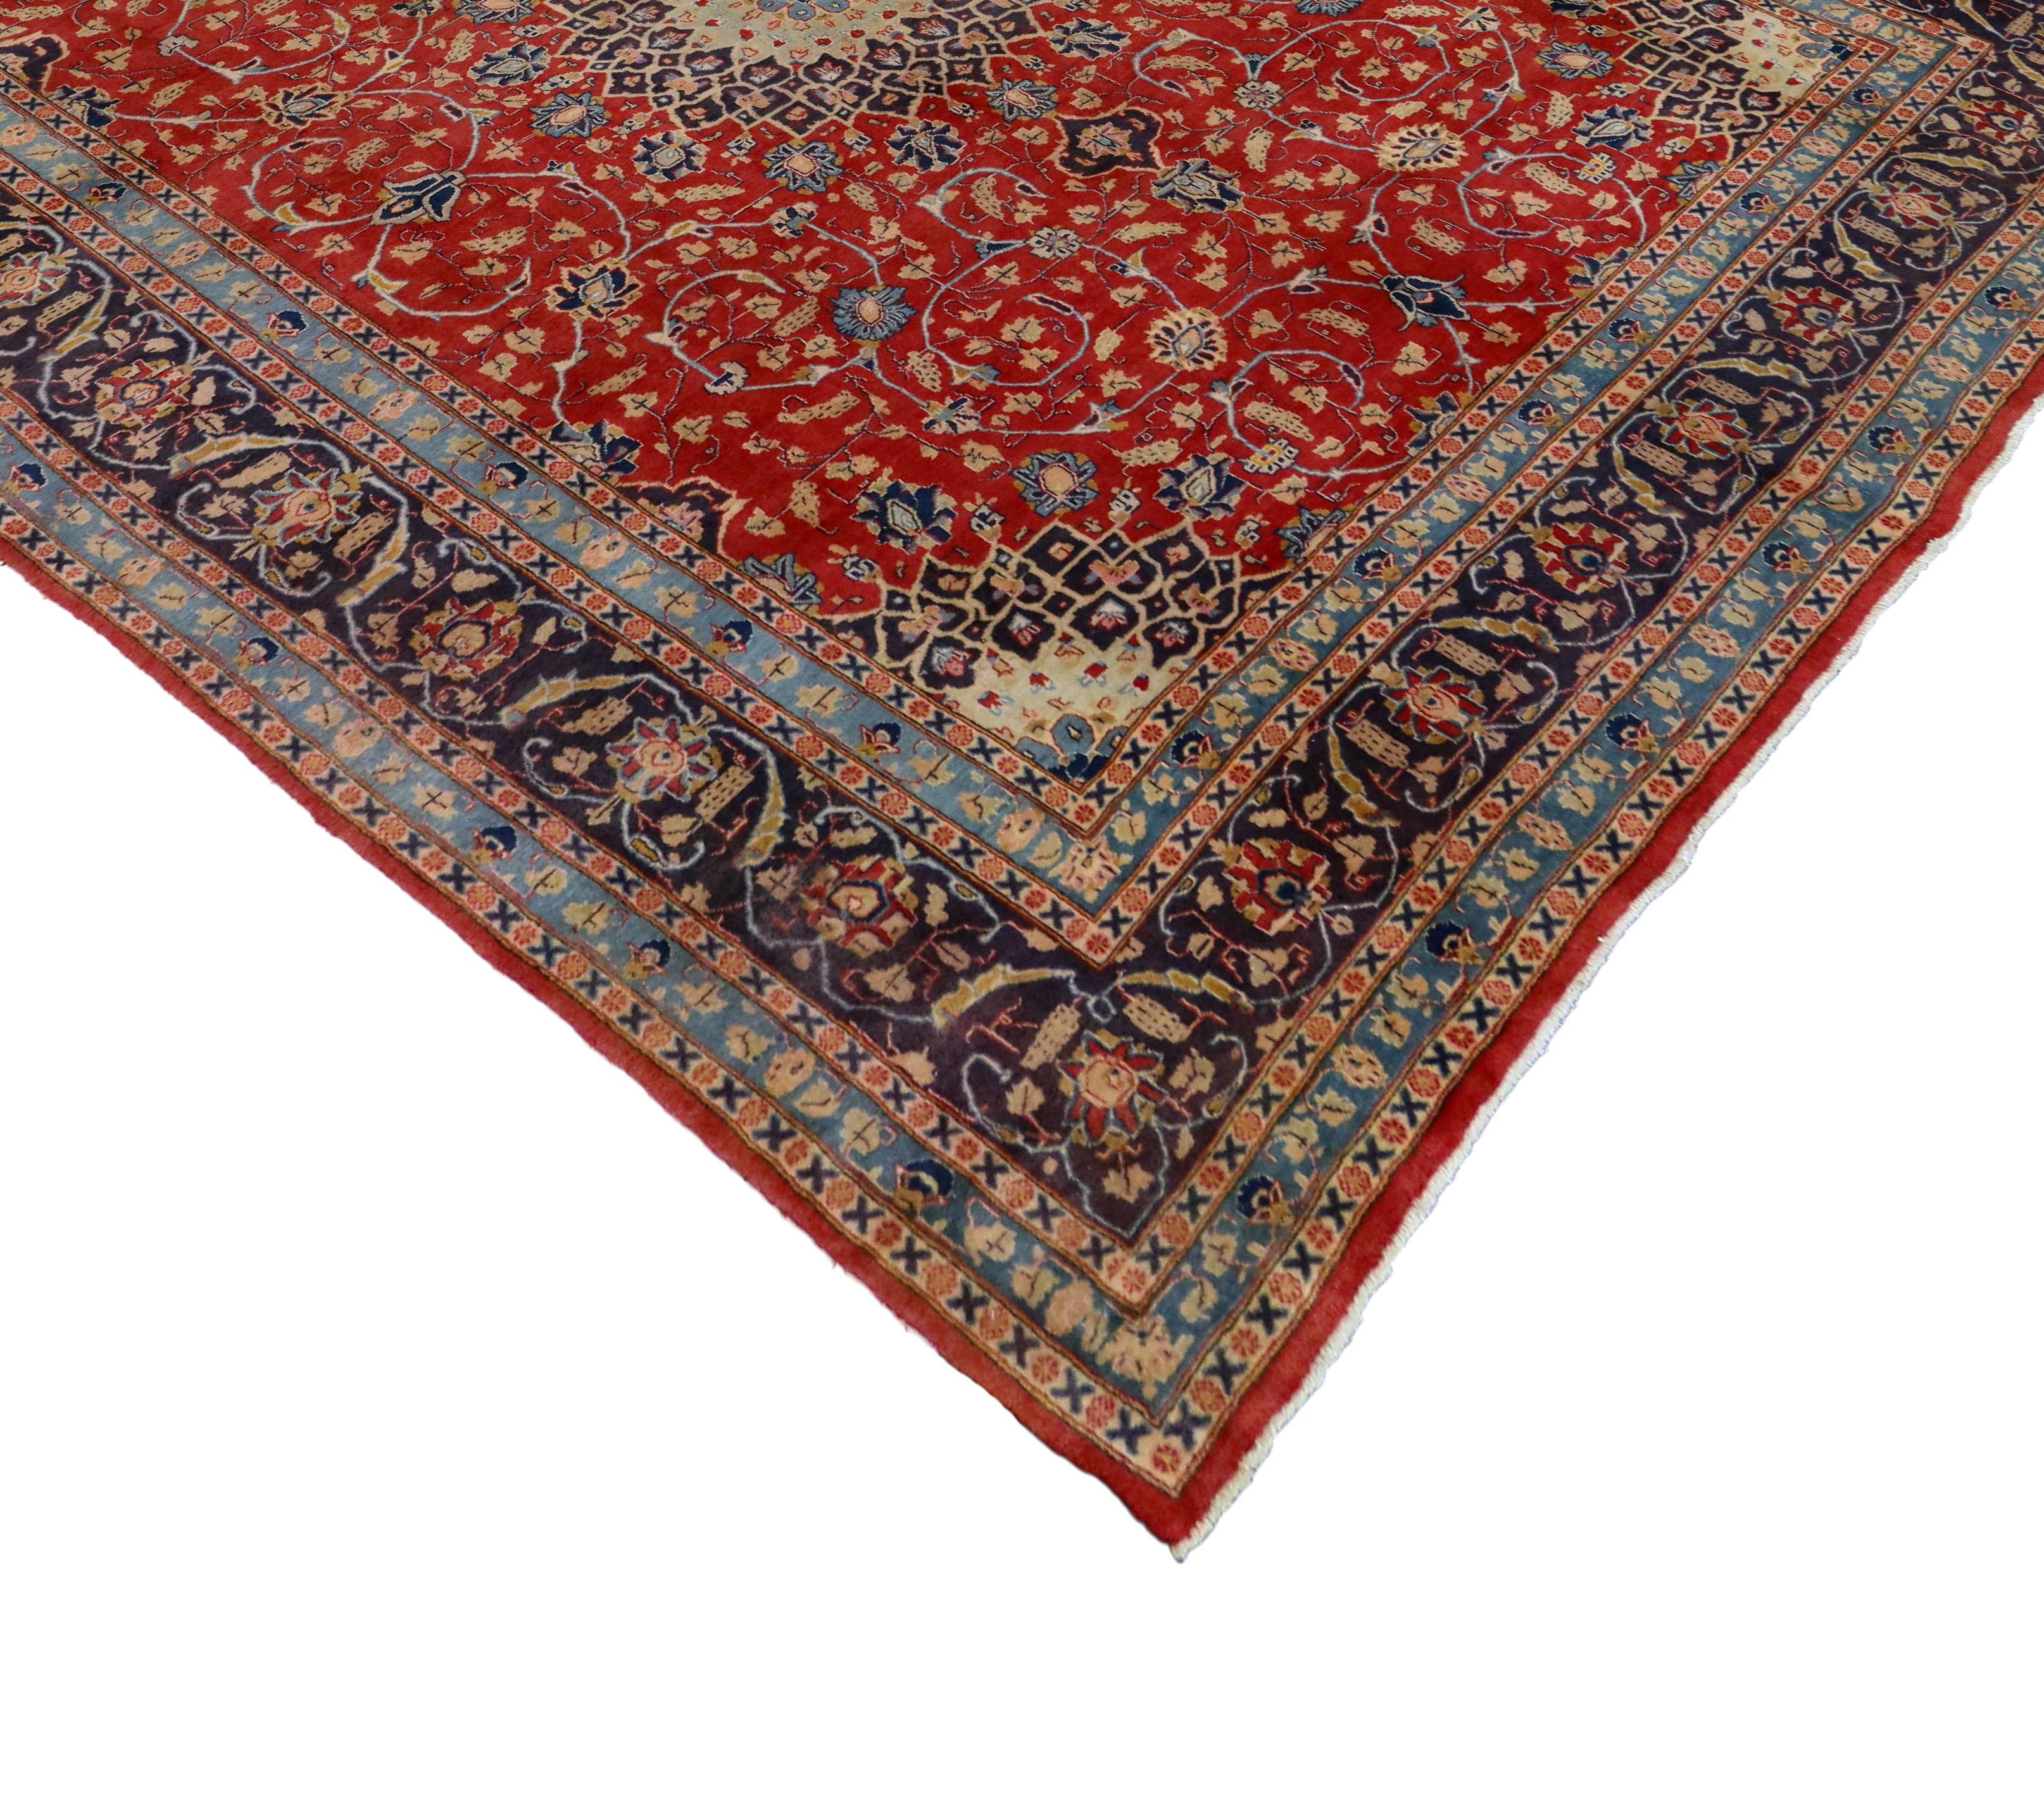 74484, vintage Persian Khorassan rug with traditional style. This hand-knotted wool vintage Persian Khorassan rug features a center medallion and complementary spandrels with an allover arabesque floral pattern surrounded by a classic border